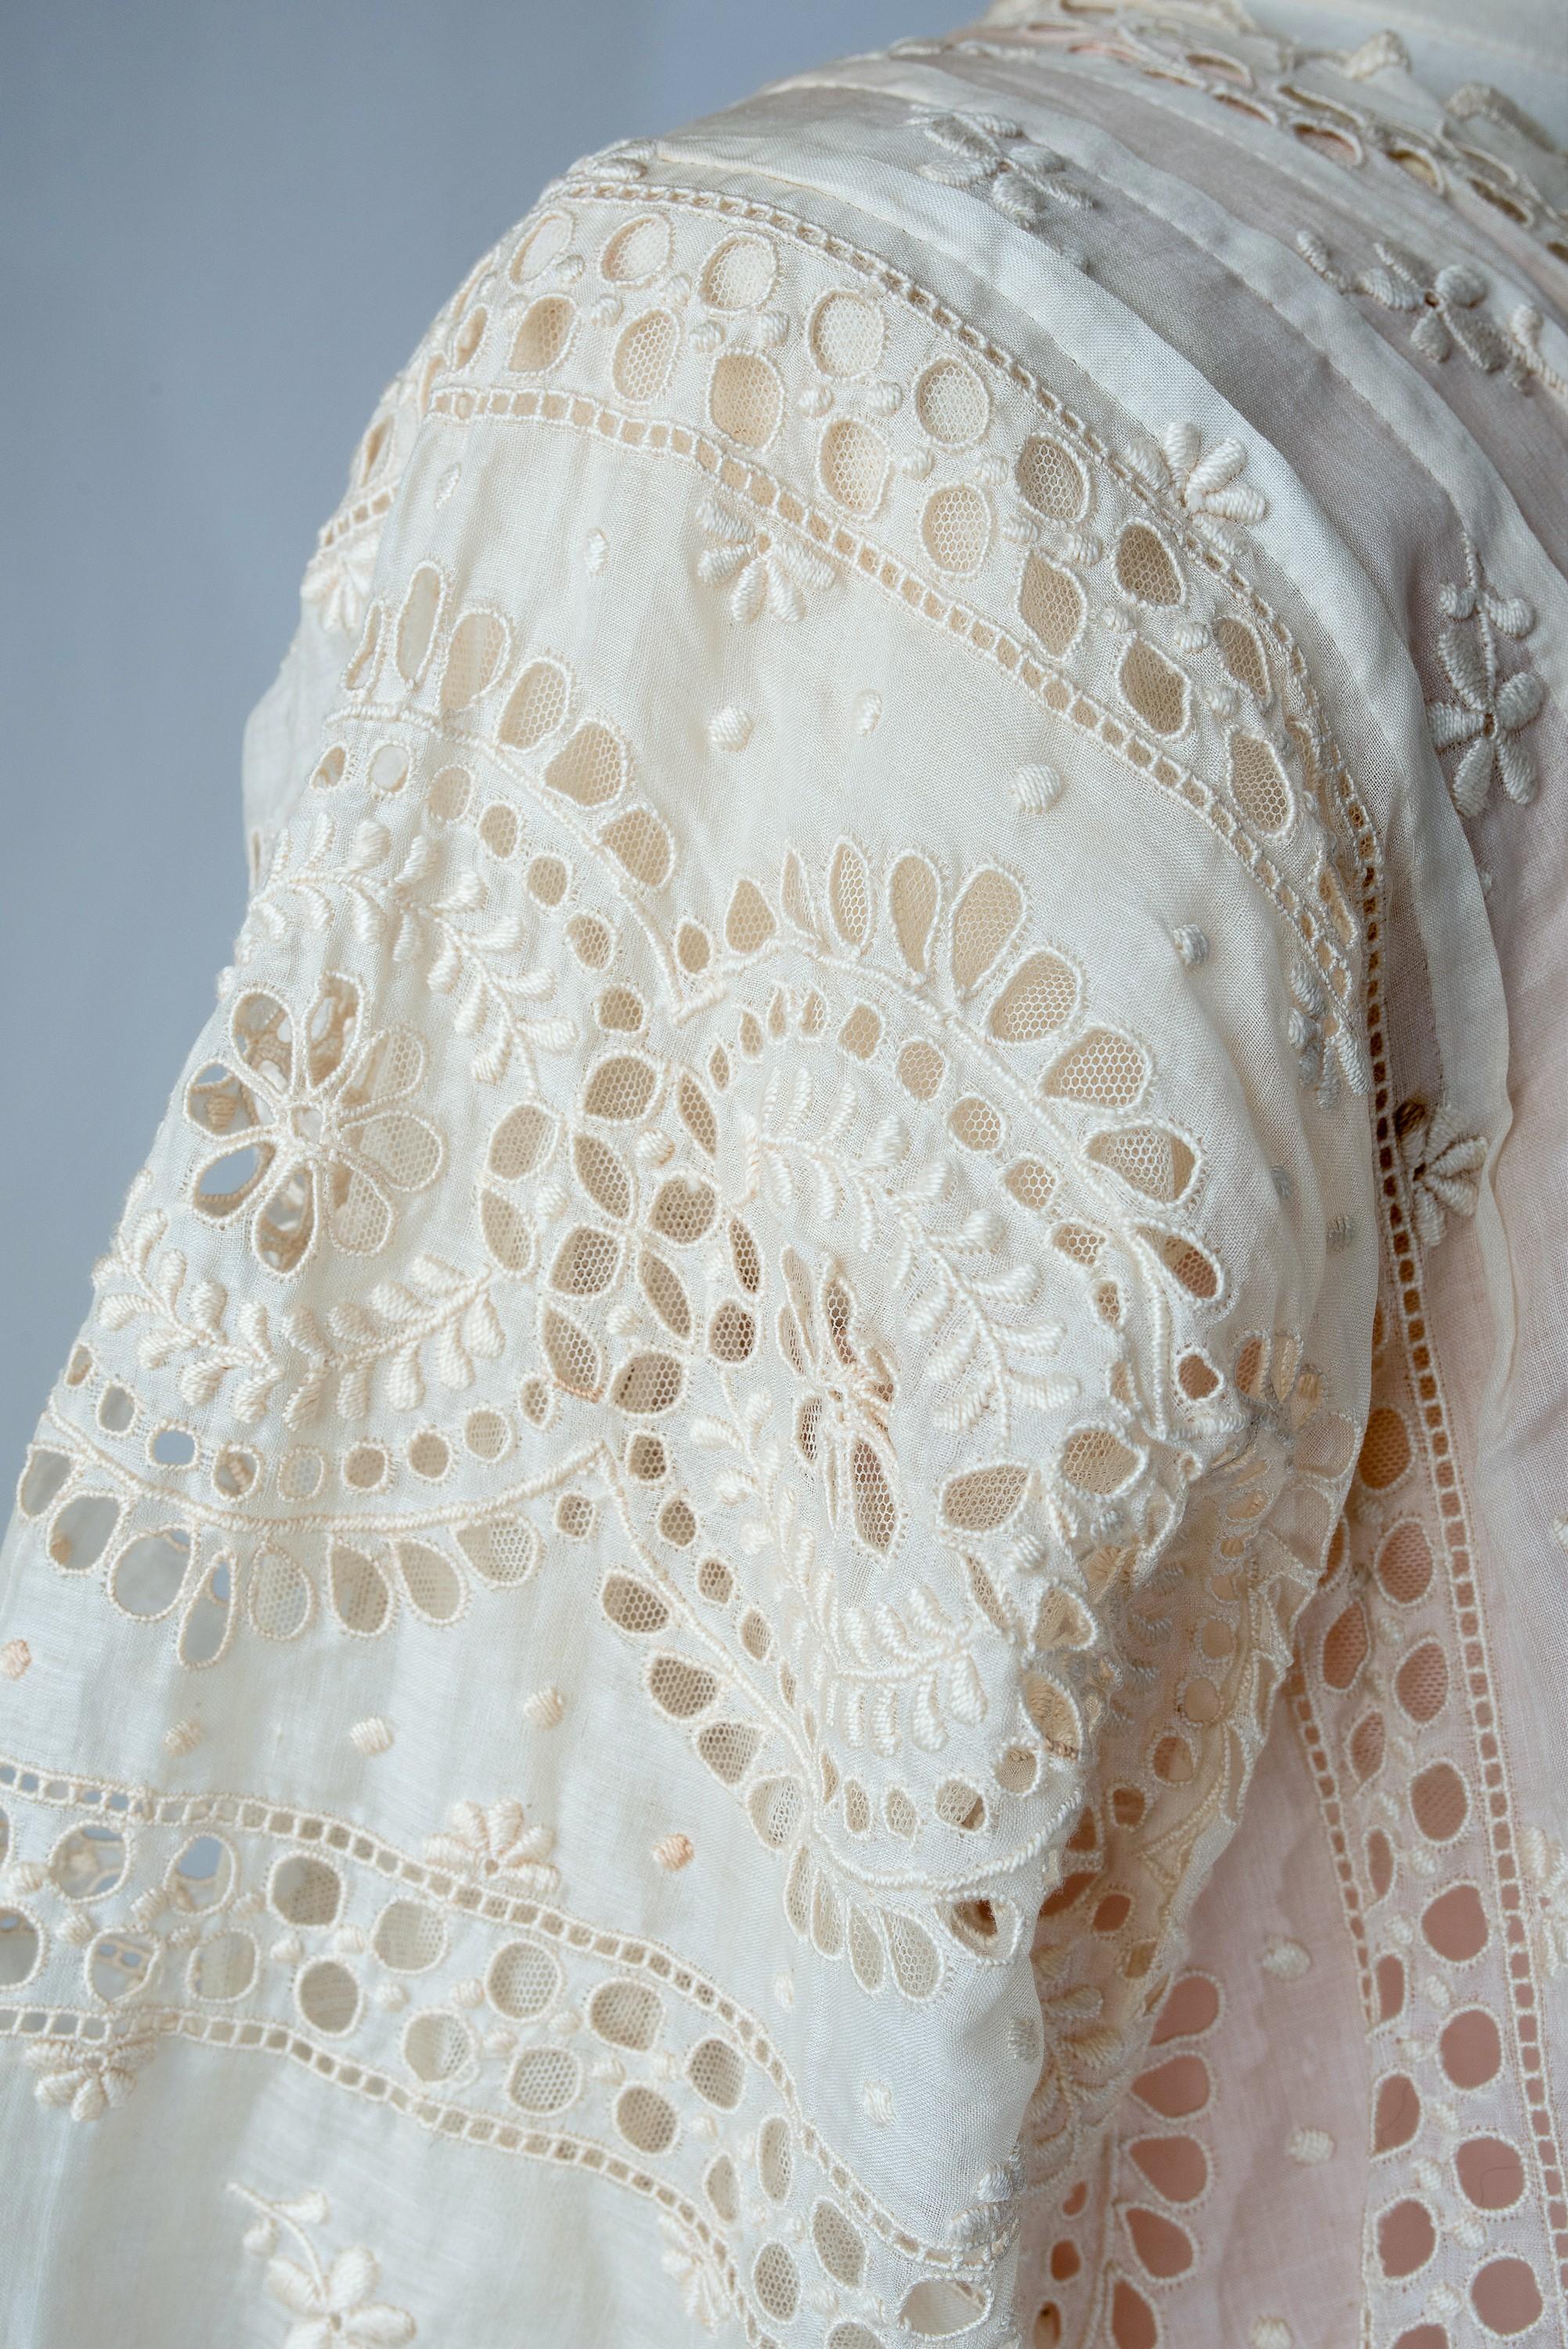 Gray A silk pongee & White Embroidery Chiffon Summer Dress - France Circa 1920 For Sale